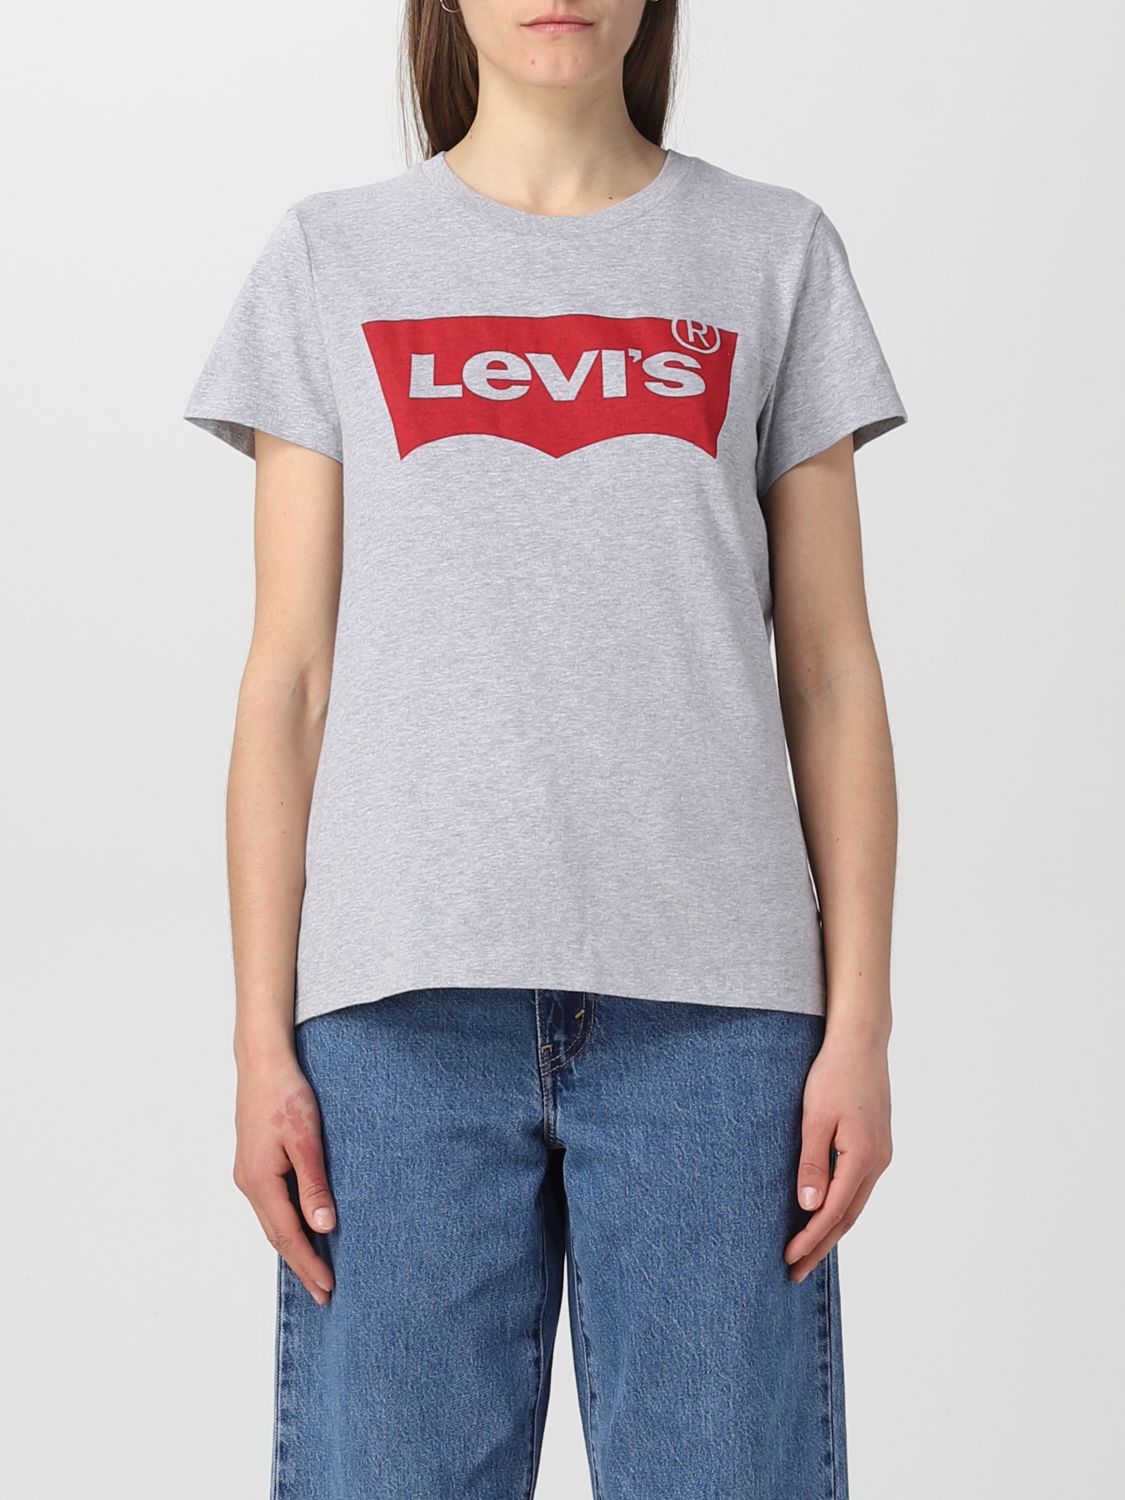 LEVI'S: t-shirt for woman - Grey | Levi's t-shirt 173691686 online on ...